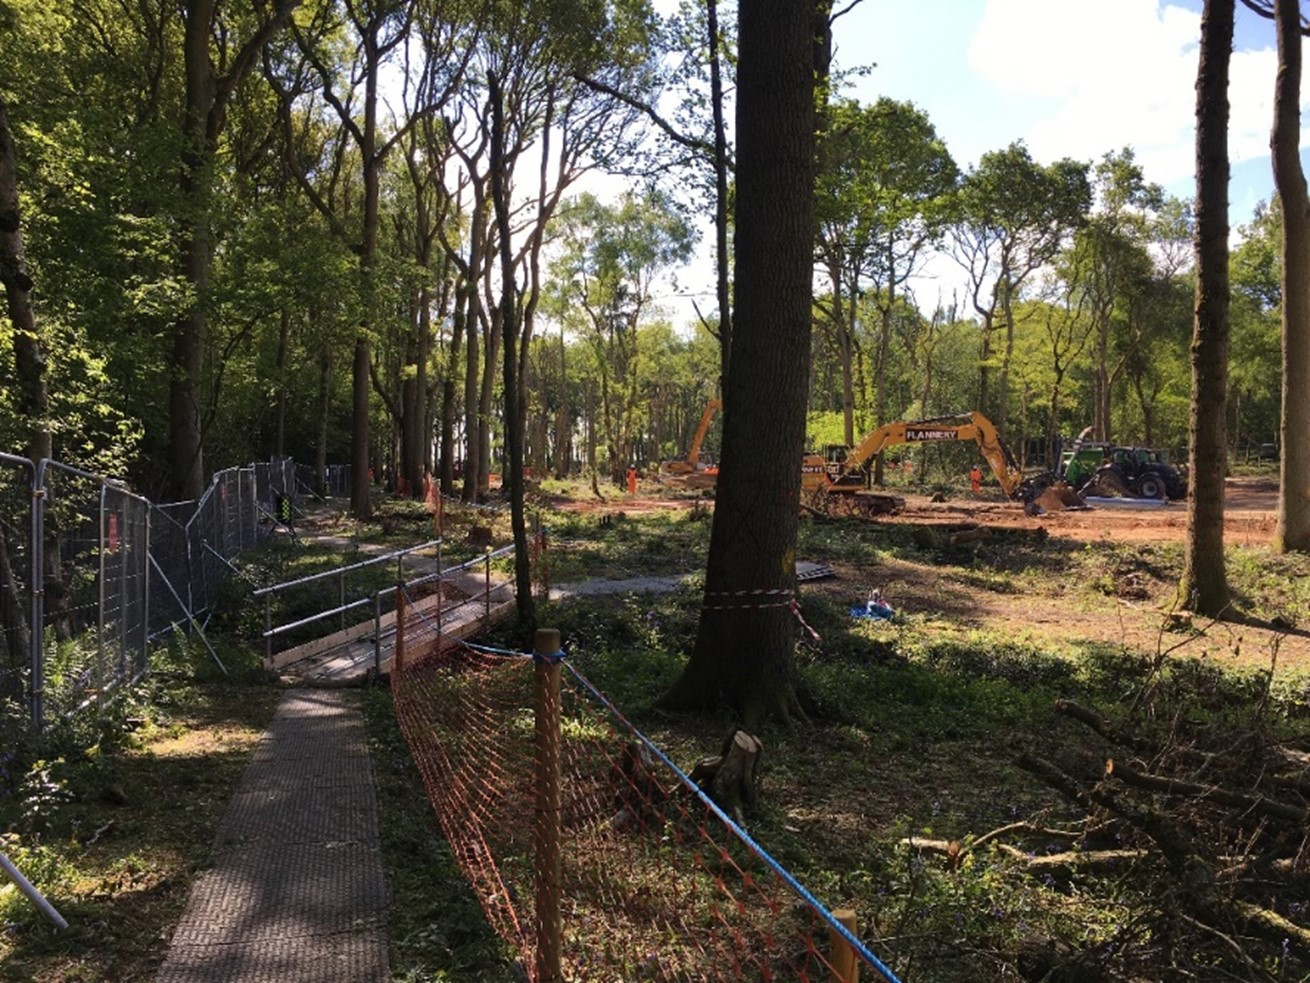 A picture showing the pedestrian walkways during soil translocation at Broadwells Wood 